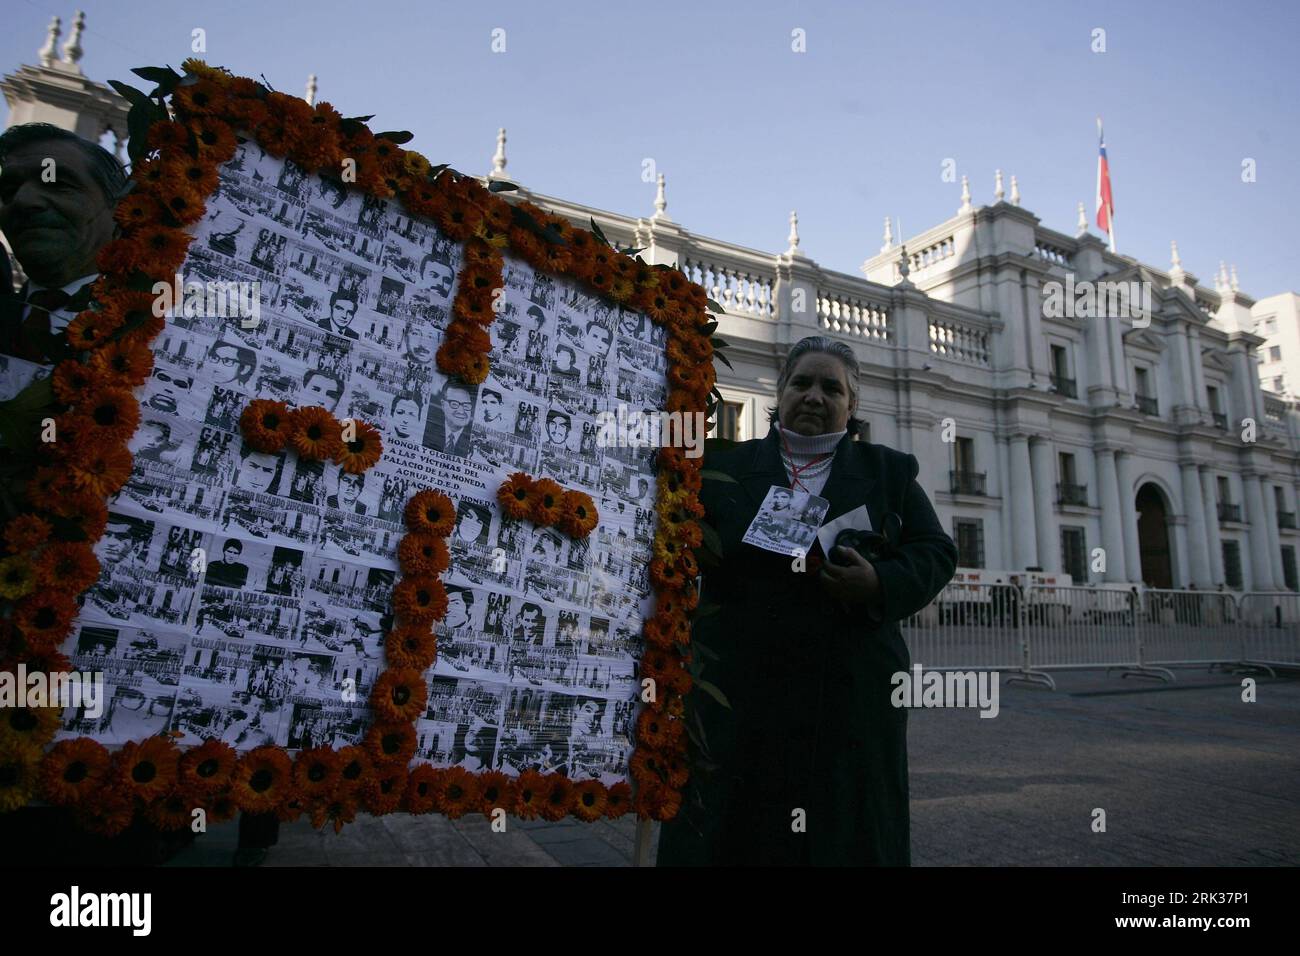 Bildnummer: 53348537  Datum: 11.09.2009  Copyright: imago/Xinhua (090912) -- SANTIAGO, Sept. 12, 2009 (Xinhua) -- Relatives of arrested and missing by the dictatorship of Augusto Pinochet participate in the rally marking the 36th anniversary of the coup that ousted president Salvador Allende and brought General Augusto Pinochet to power, in Santiago, capital of Chile, Sept. 11, 2009. (Xinhua/Danny Alveal Aravena)(axy) (4)CHILE-SANTIAGO-COUP-ANNIVERSARY PUBLICATIONxNOTxINxCHN kbdig xkg 2009 quer o0 Gedenken, Angehörige, Opfer, Diktatur, Jahrestag, Staatsstreich    Bildnummer 53348537 Date 11 09 Stock Photo